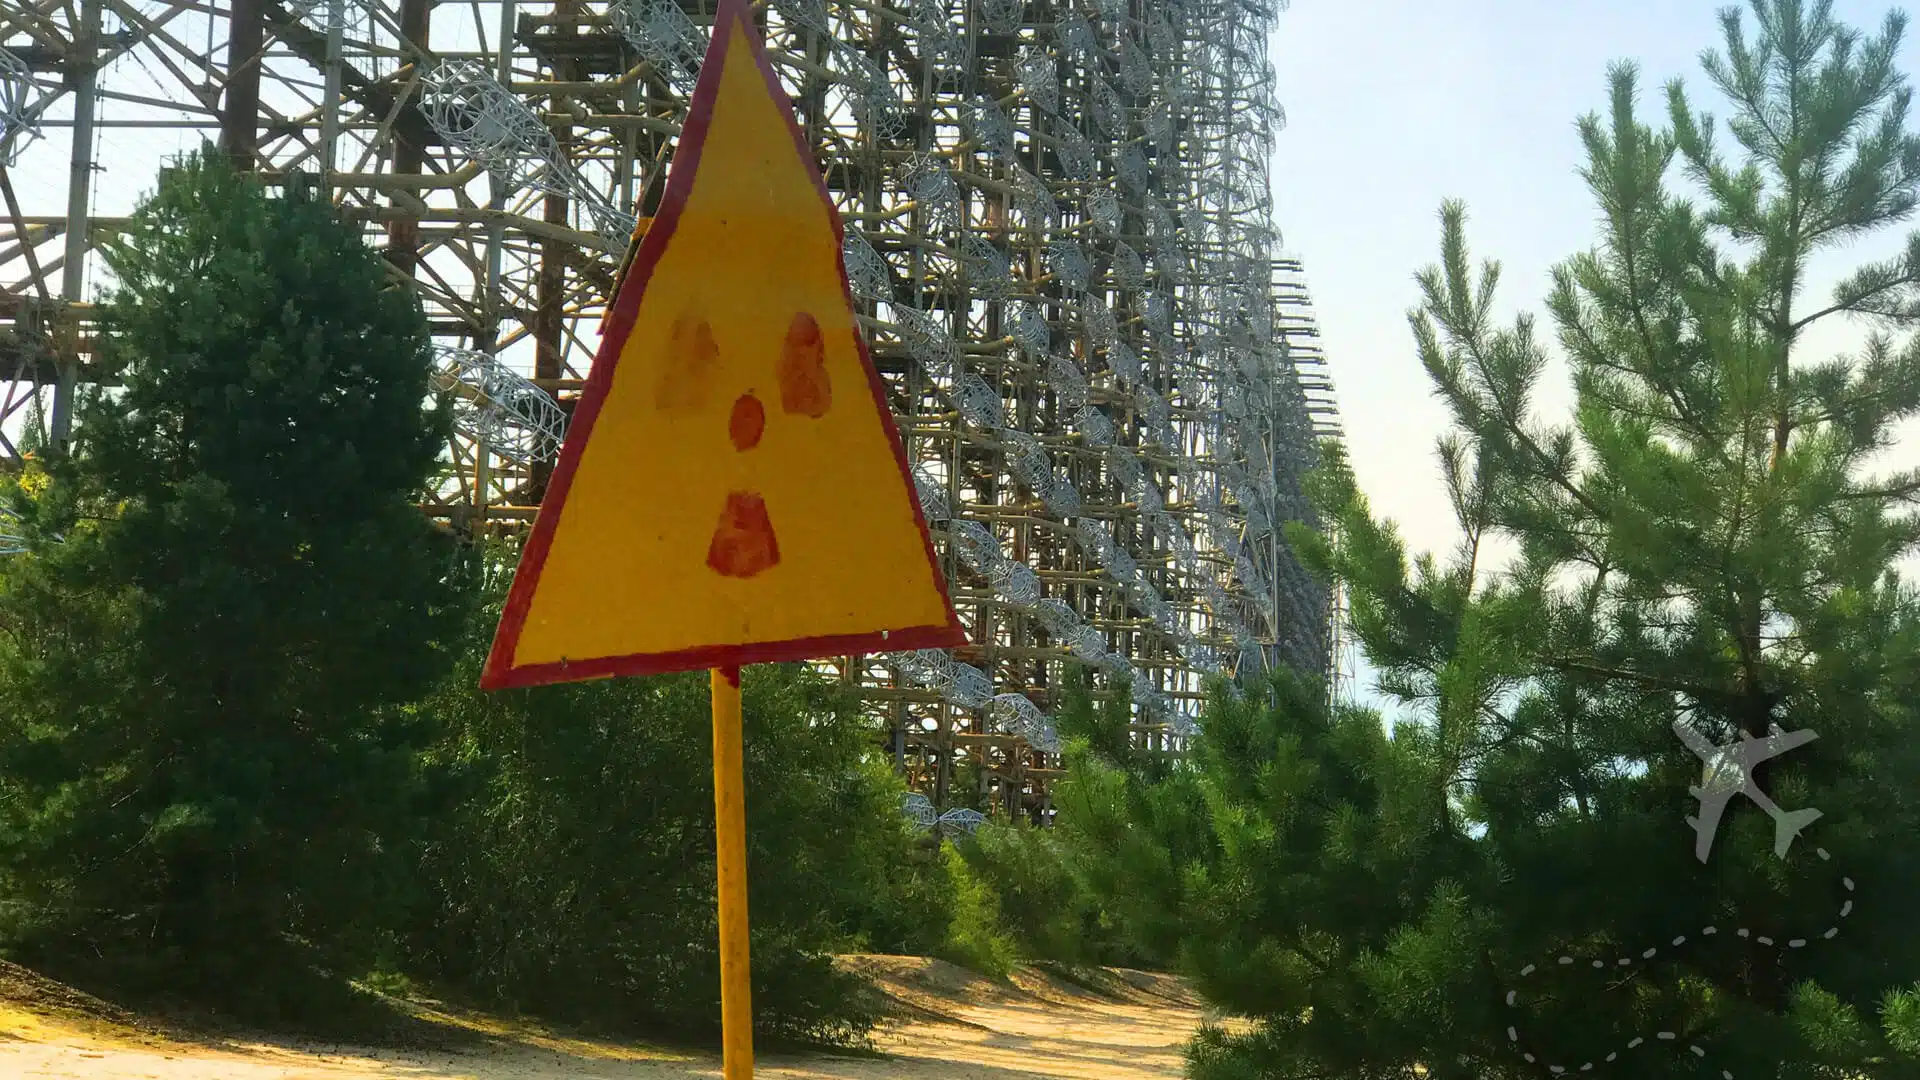 Radiation warning sign in front of the Duga OTH antenna array.